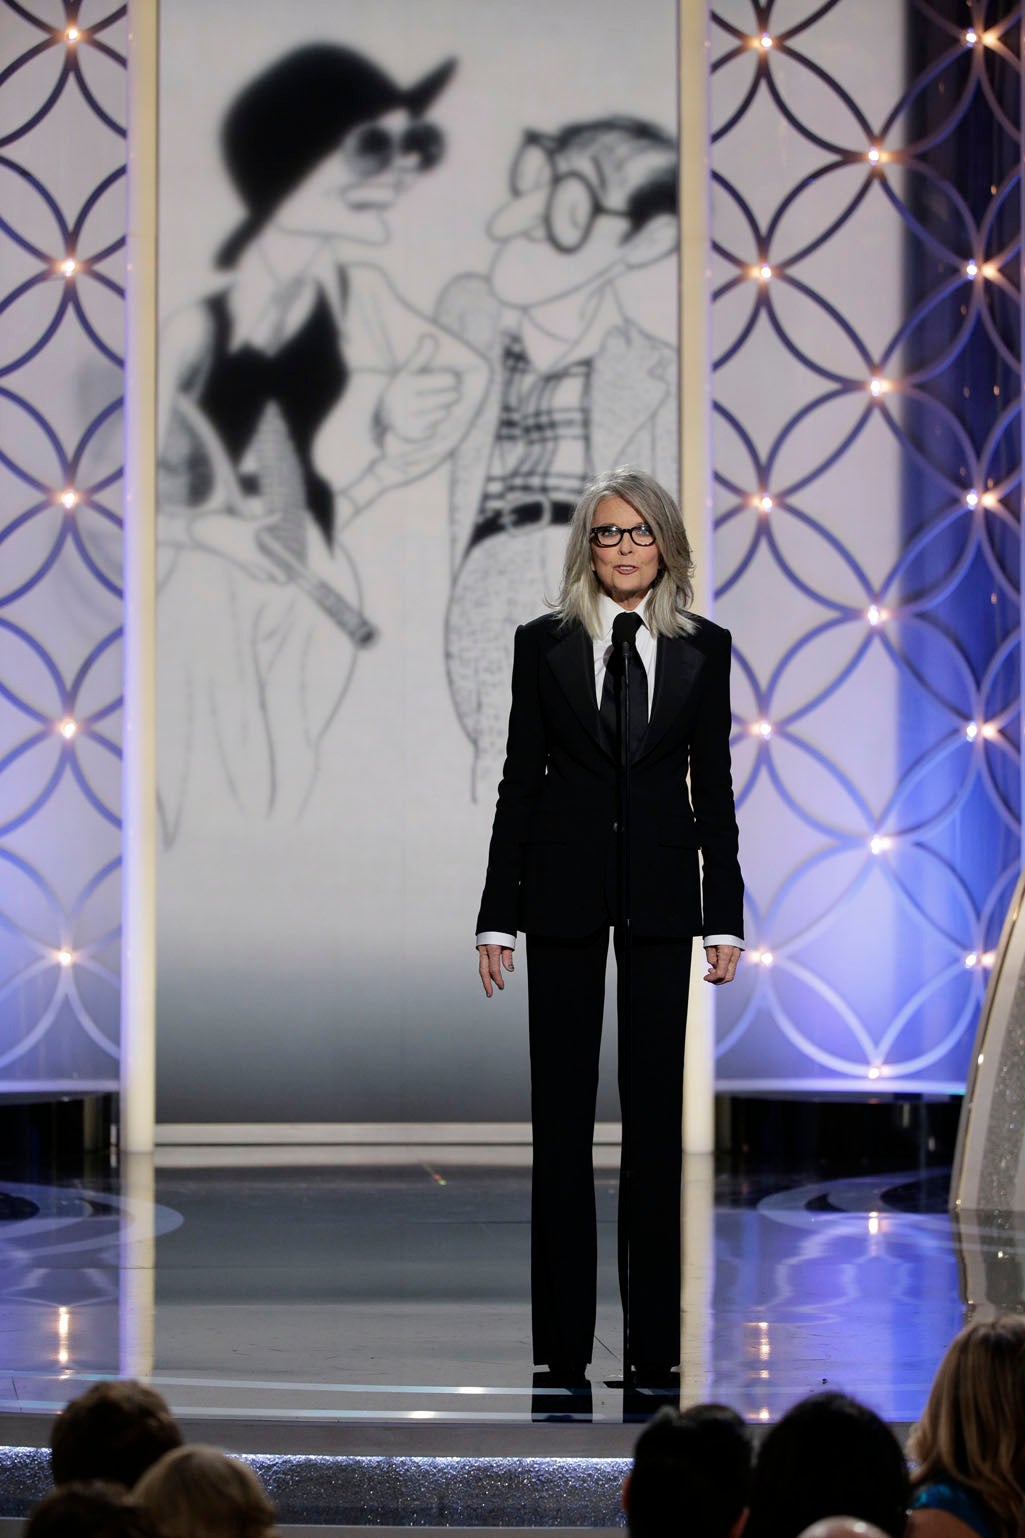 Diane Keaton accepted her former flame Woody Allen's Golden Globe on his behalf.